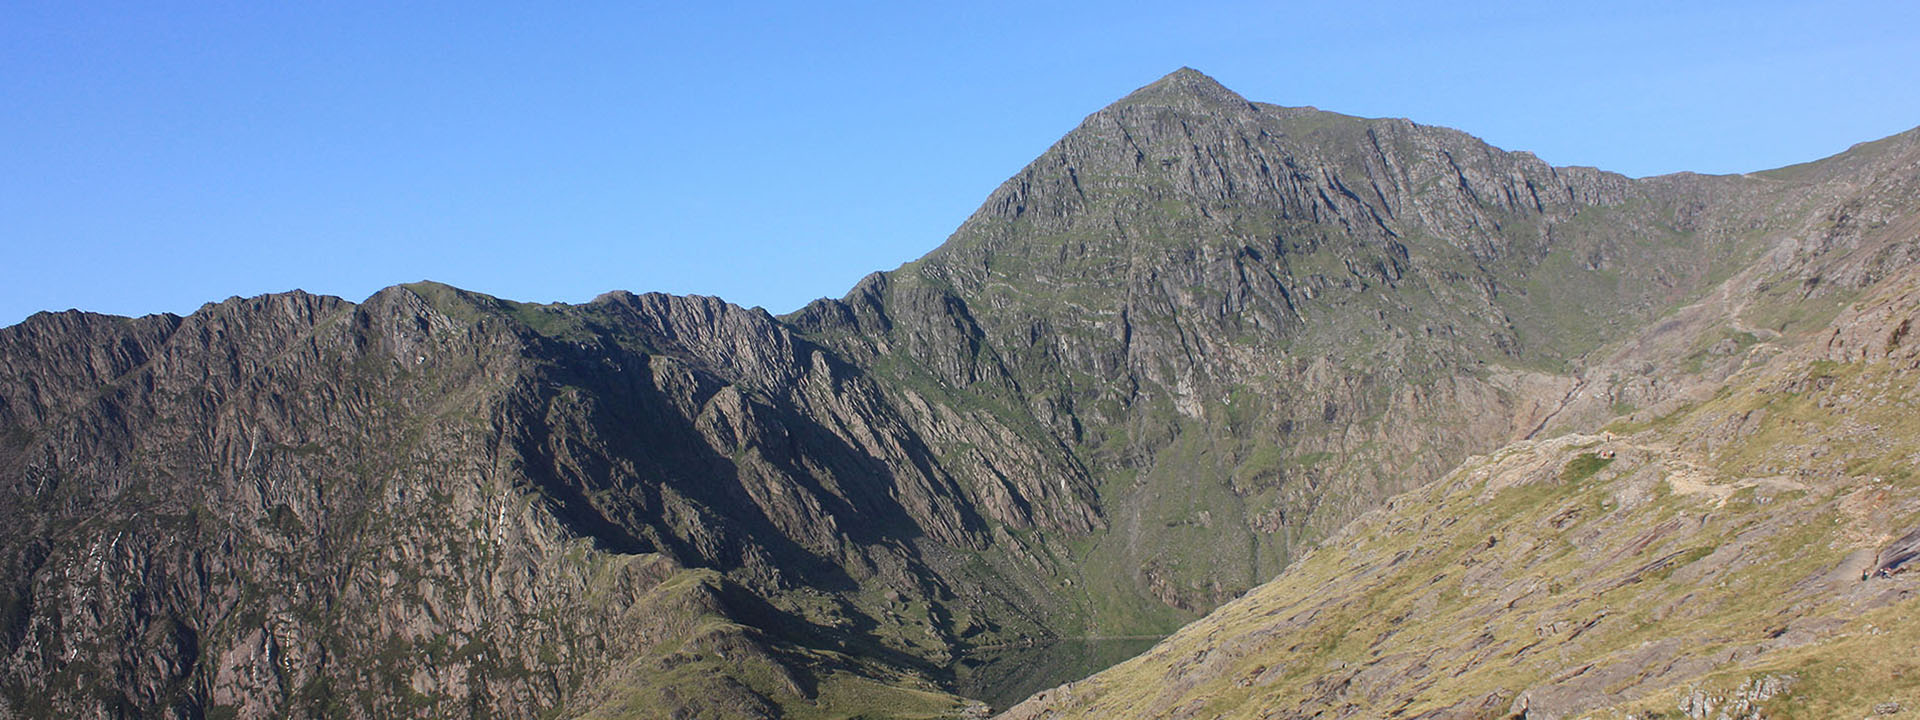 Bailey Streetscene director takes The 3 Peaks Challenge to raise money for good cause